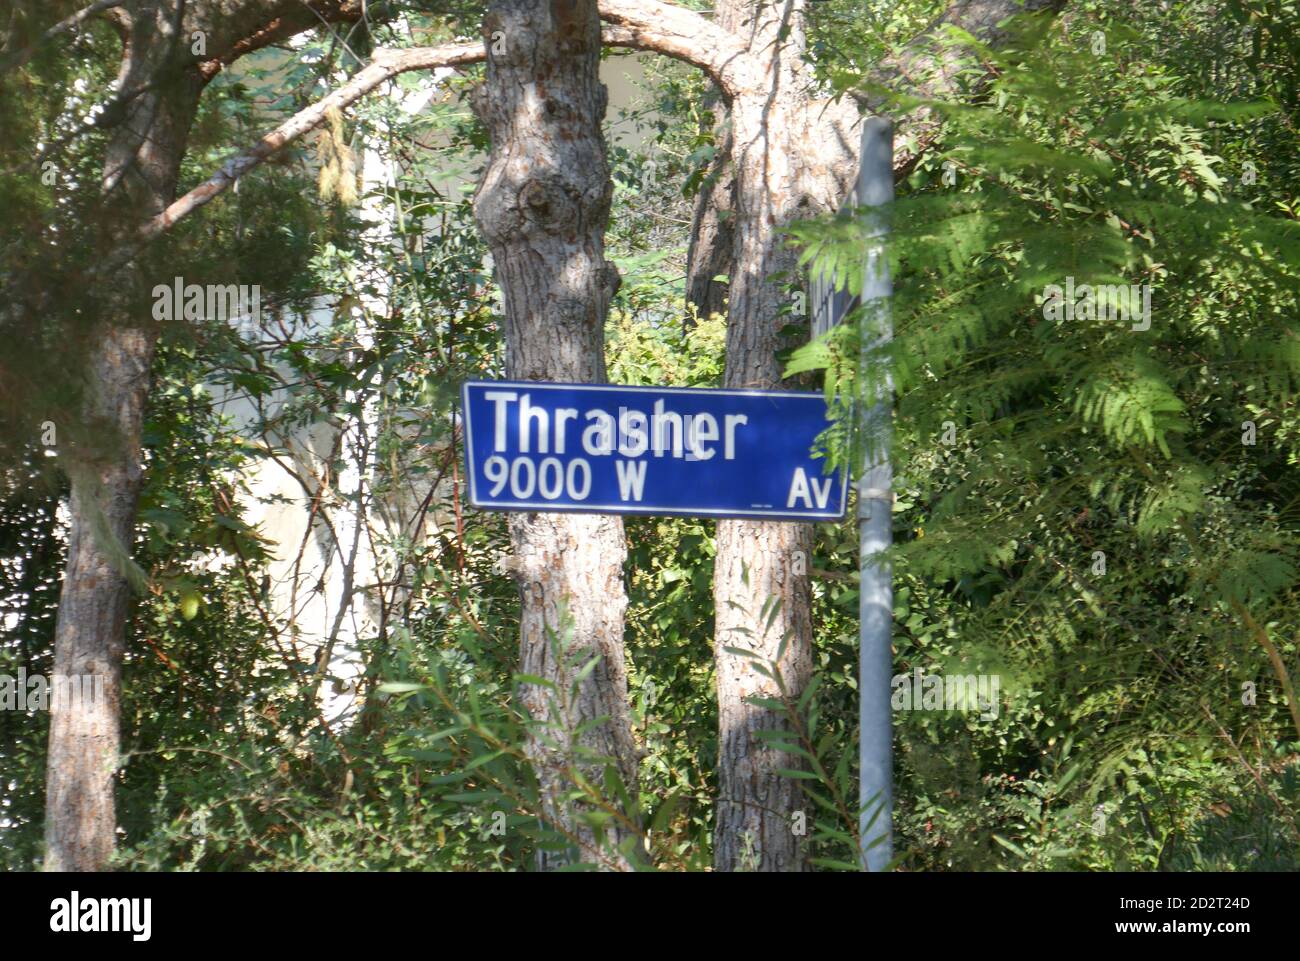 Los Angeles, California, USA 6th October 2020 A general view of atmosphere of Thrasher Avenue where Moe Howard of the Three Stooges and John Lennon of the Beatles lived on October 6, 2020 in Los Angeles, California, USA. Photo by Barry King/Alamy Stock Photo Stock Photo